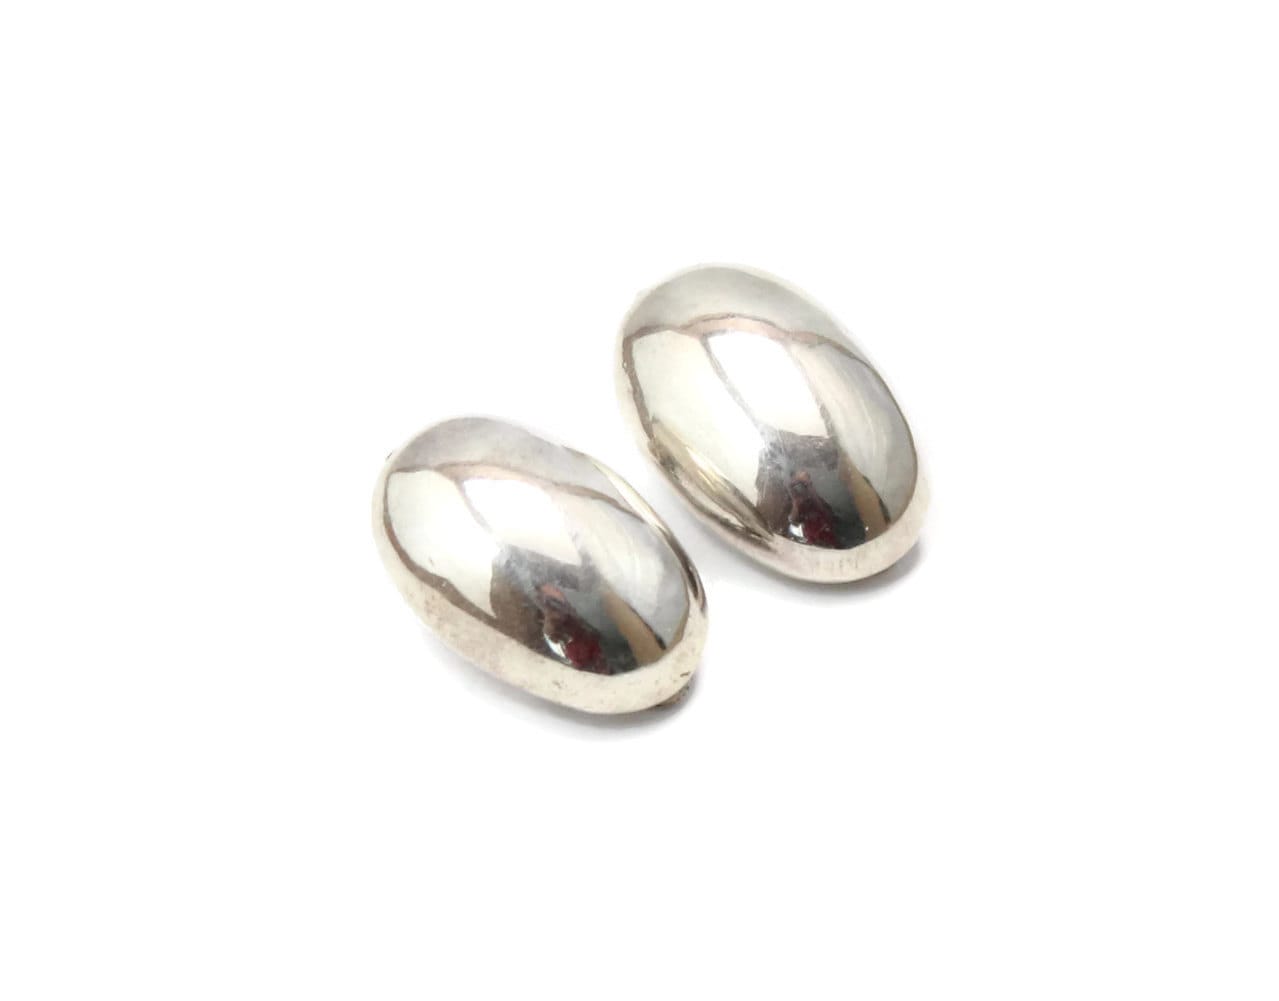 Vintage Sterling Silver Clip On Earrings Oval Shaped